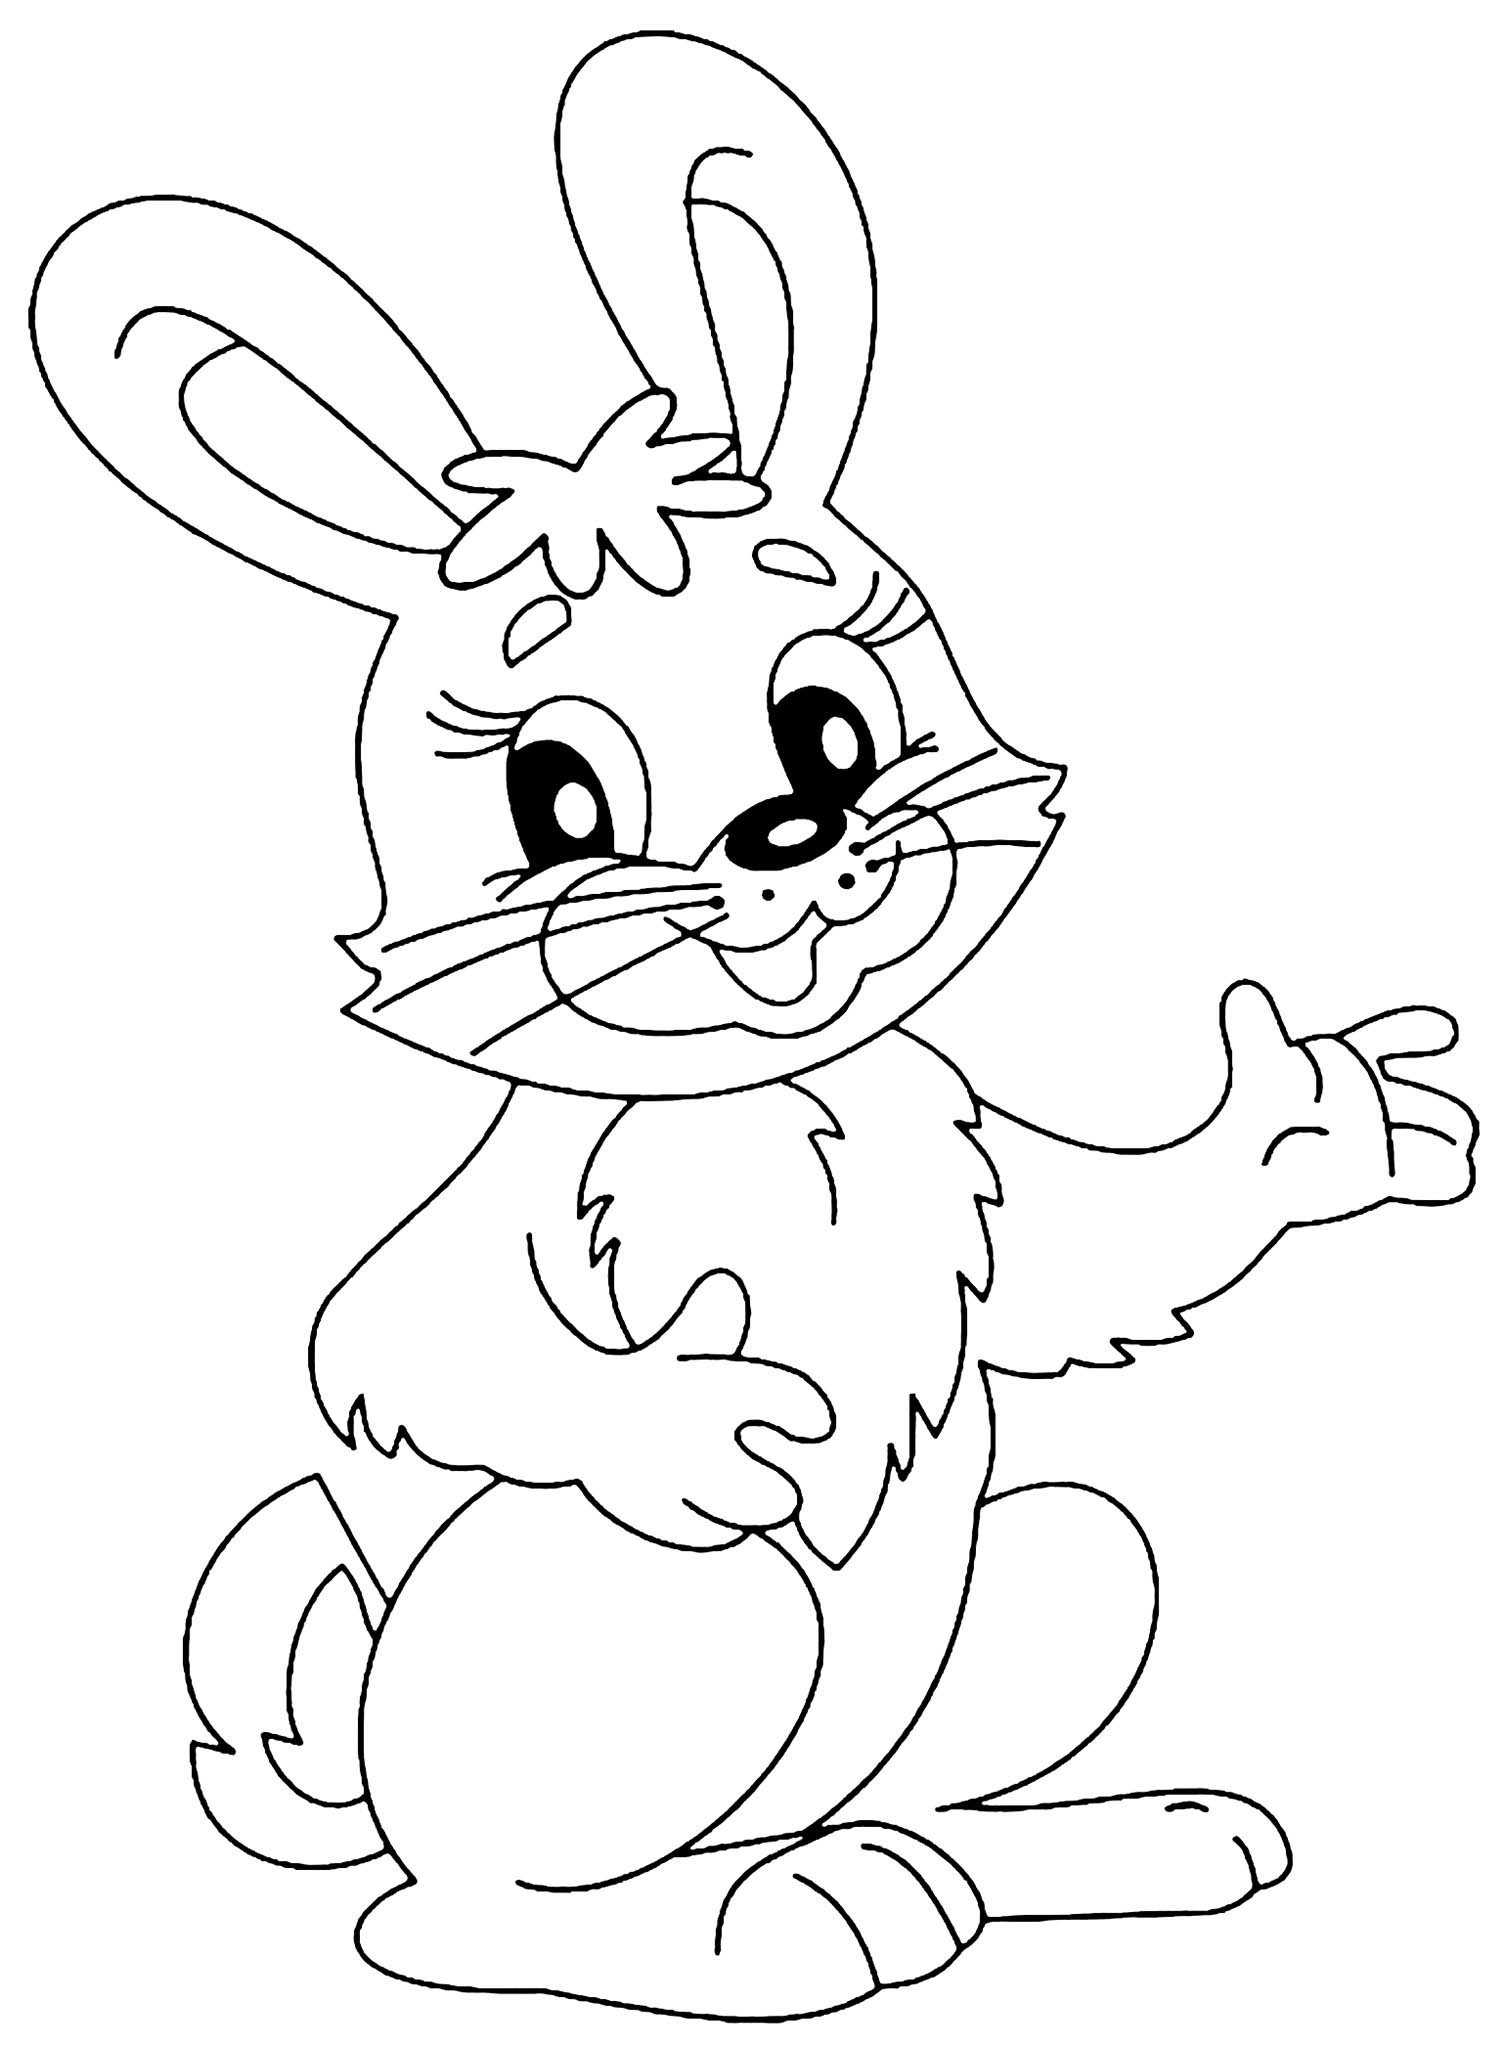 coloring pictures of bunny rabbits Rabbit for children - TAMAN ILMU